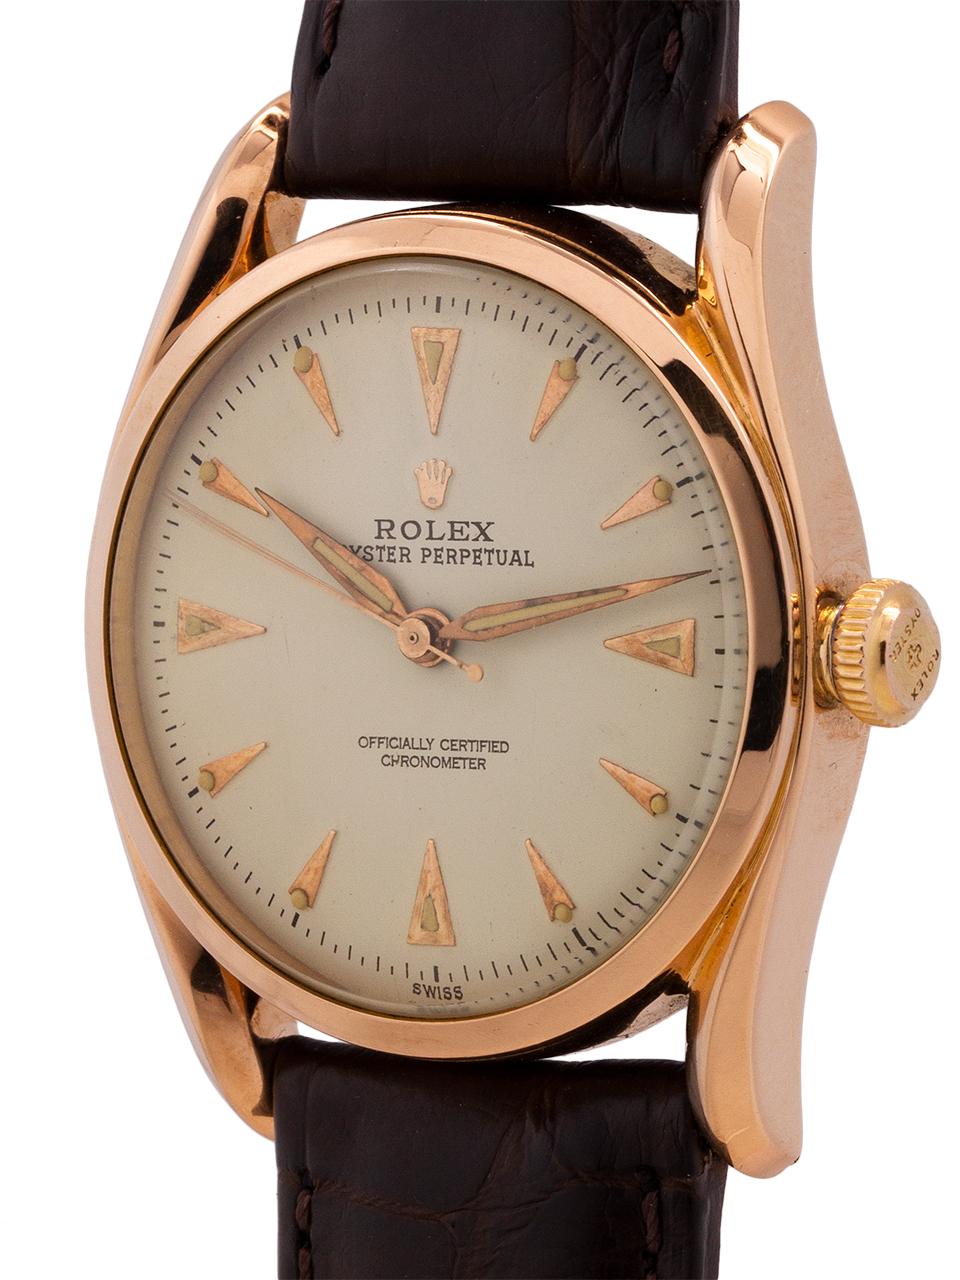 Rare example Rolex 18K rose gold Bombe ref # 6090 serial# xxx,xxx circa 1951. Featuring 33 x 40mm bombe style case with bowed lugs, smooth bezel, acrylic crystal, and very pleasing professionally restored antique white dial with rose gold applied